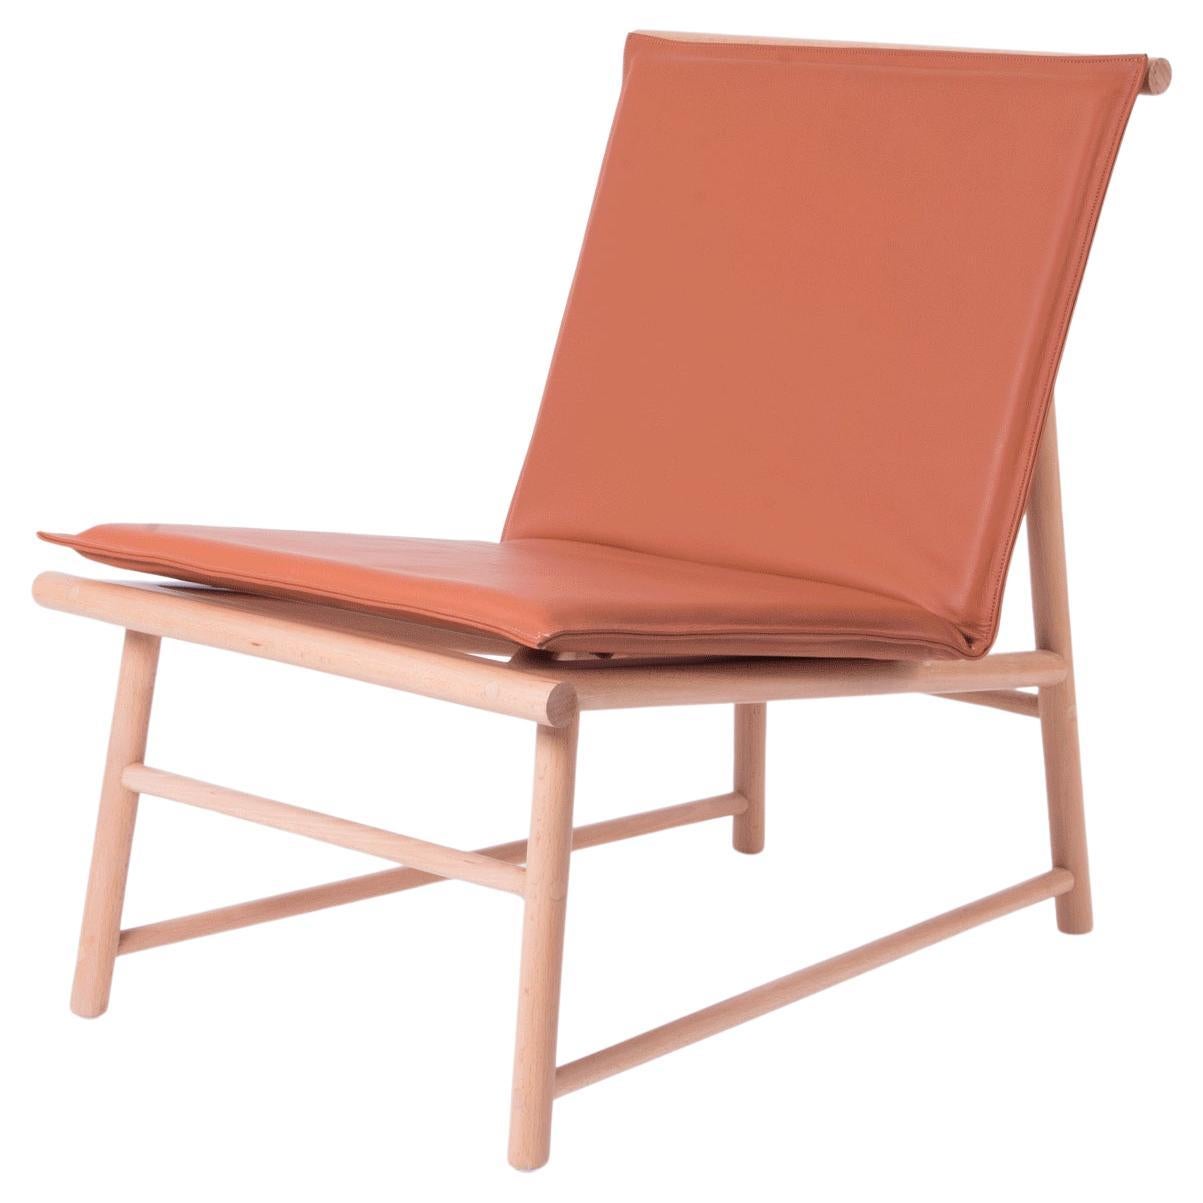 Easy Chair, Lounge Chair in Beech Wood with Natural Leather Seat